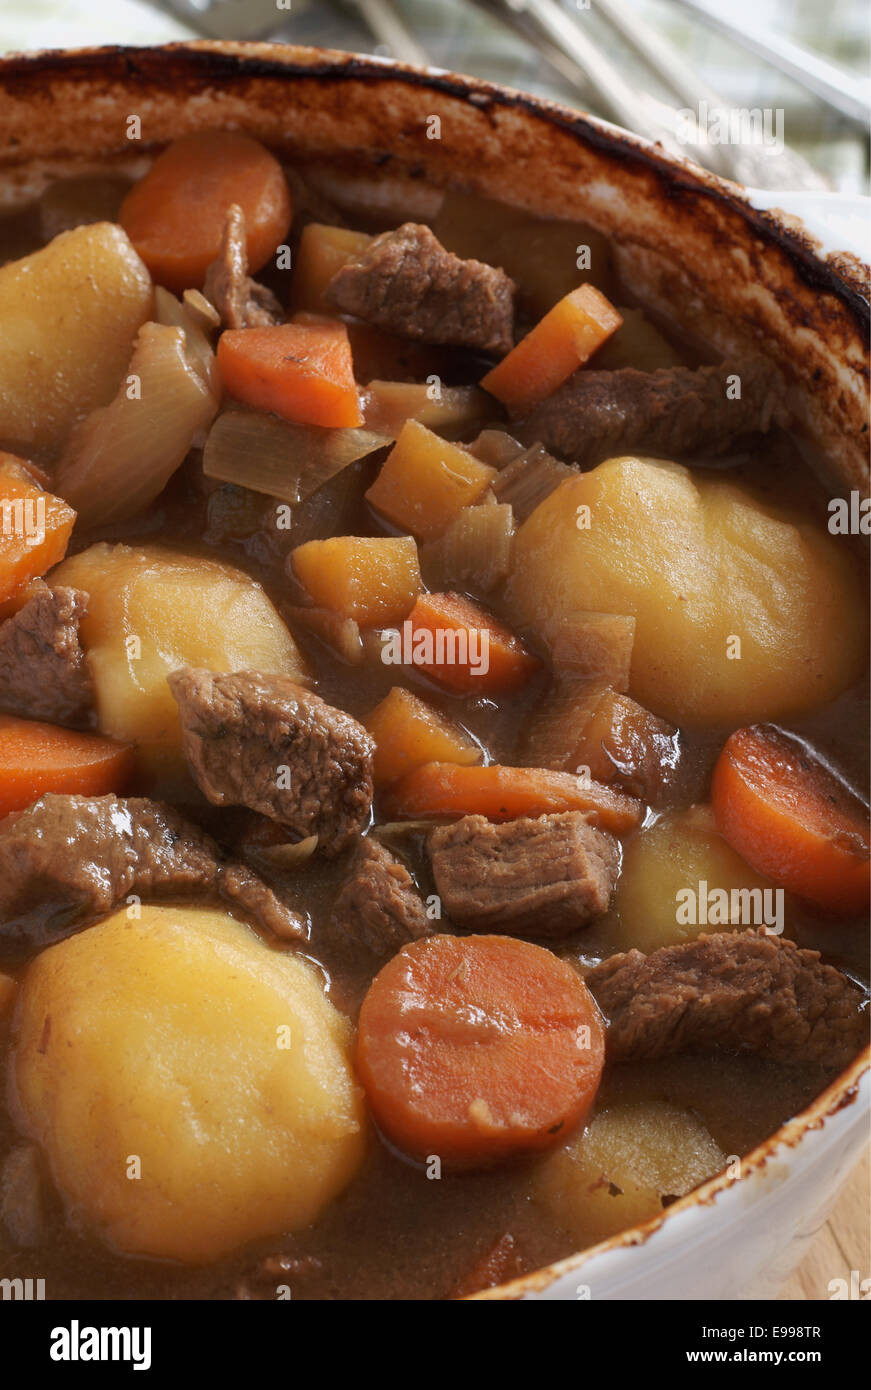 Stew a traditional dish containing meat gravy and vegetables Stock Photo